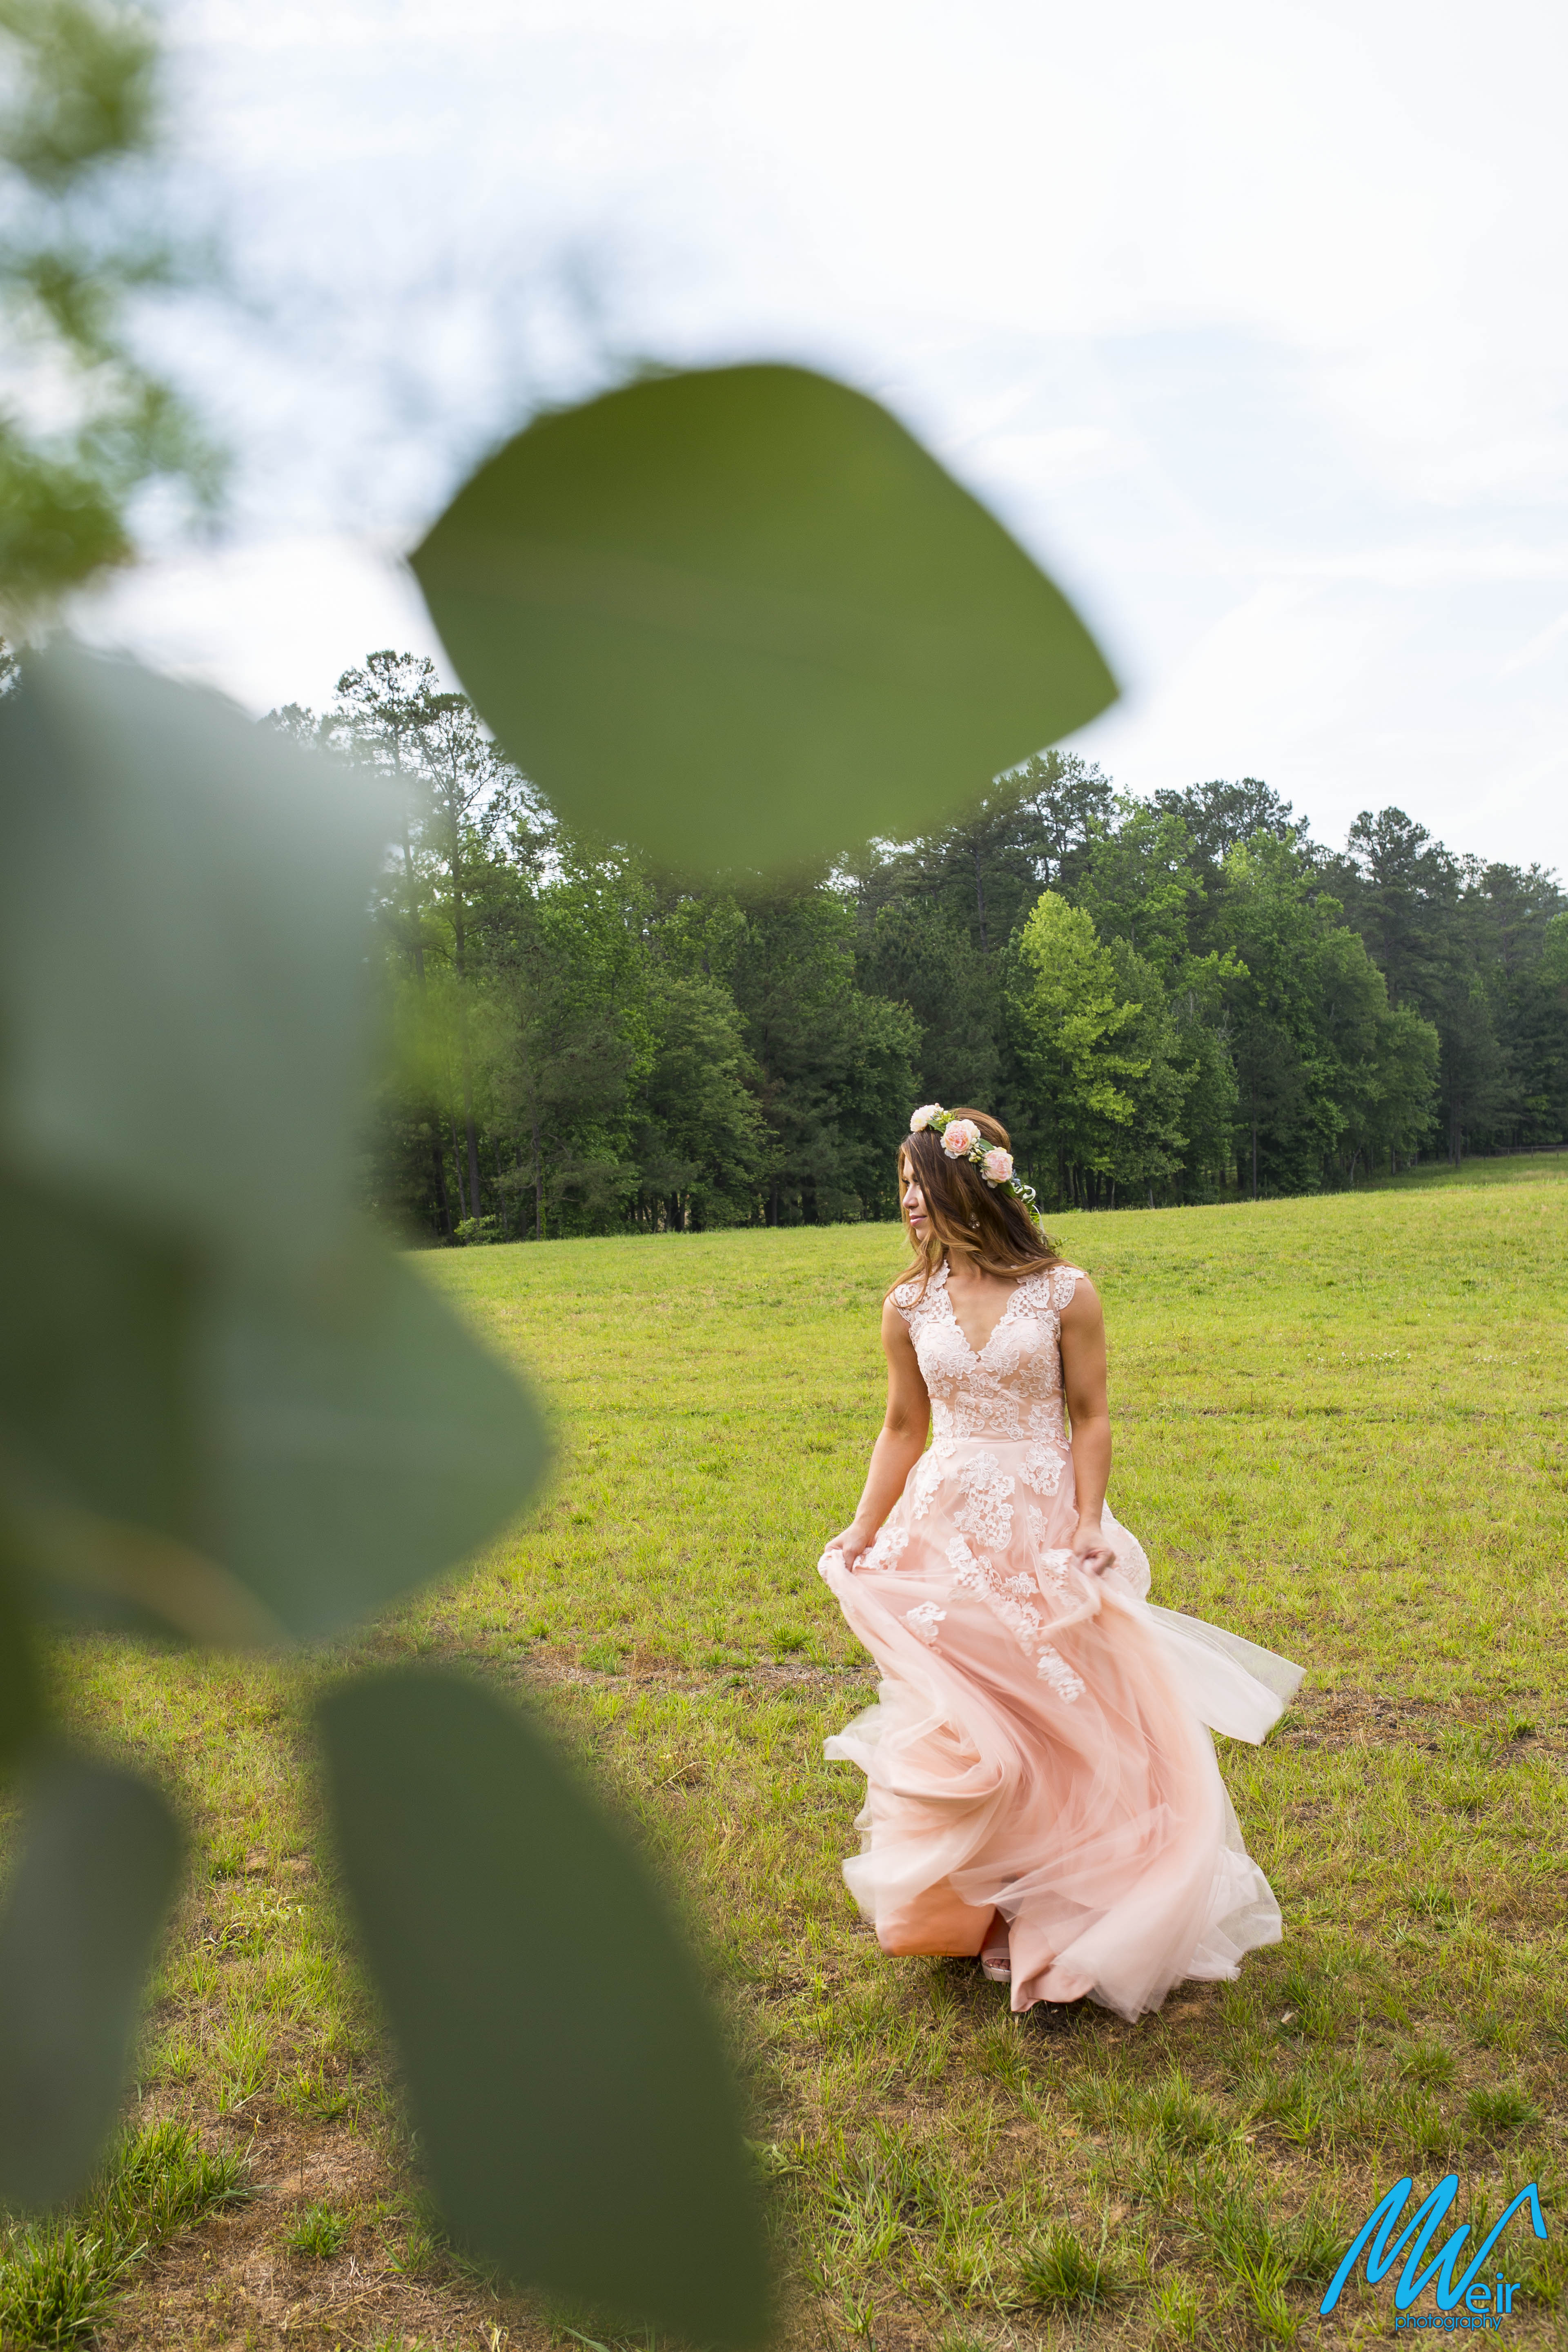 Bride playing with her dress in a field